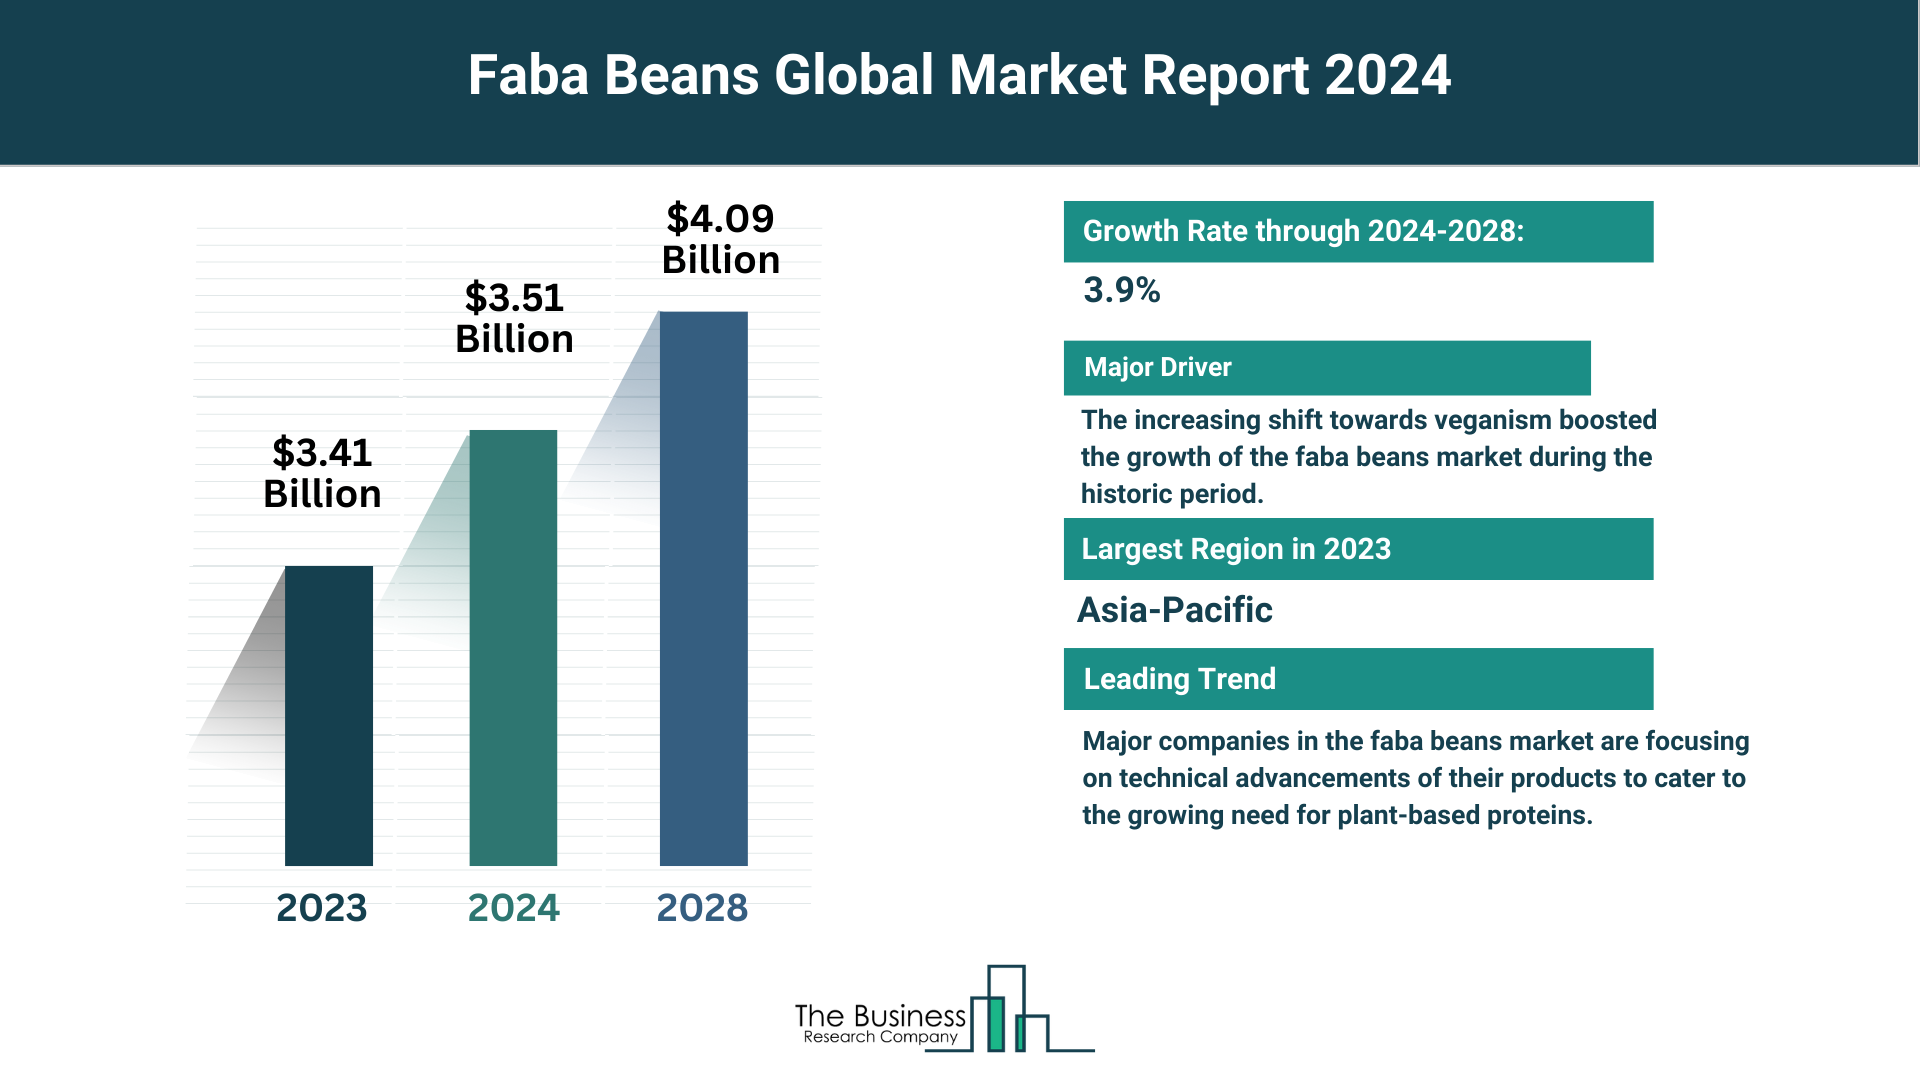 How Is the Faba Beans Market Expected To Grow Through 2024-2033?